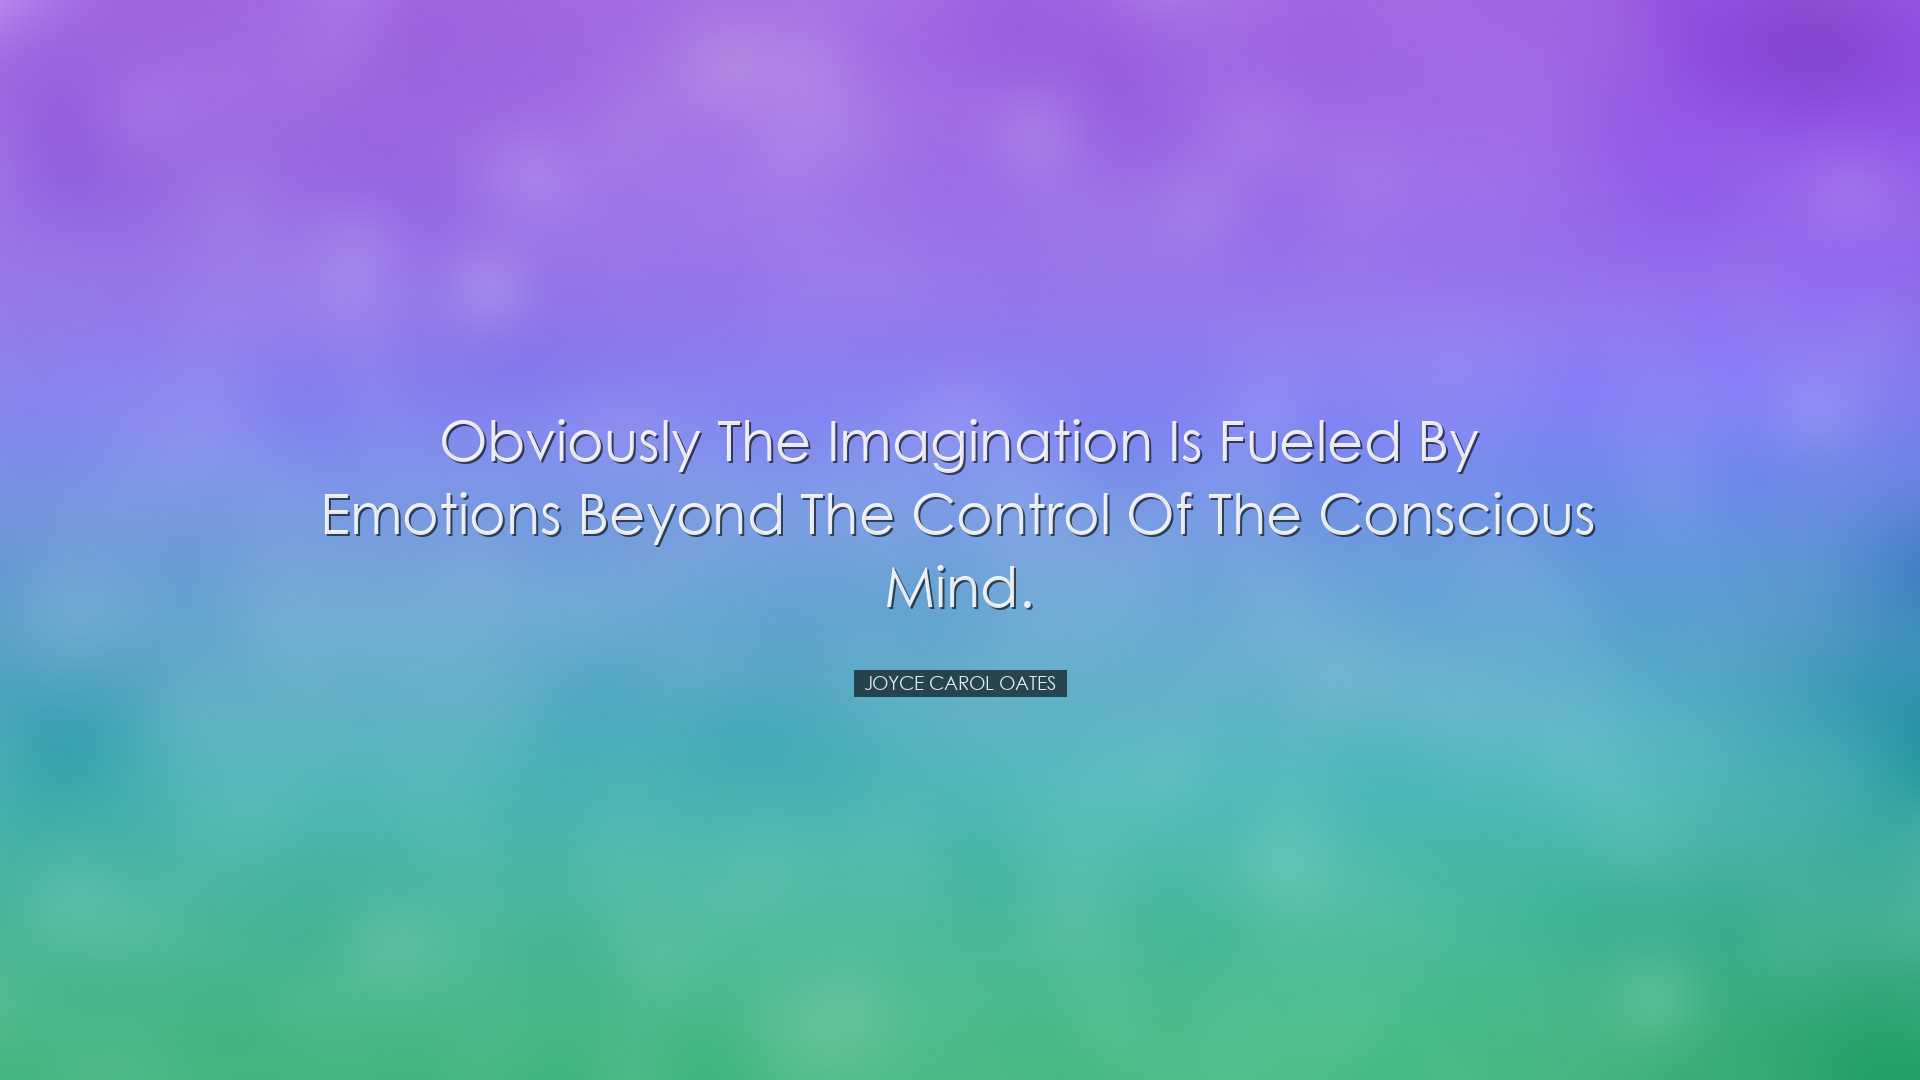 Obviously the imagination is fueled by emotions beyond the control